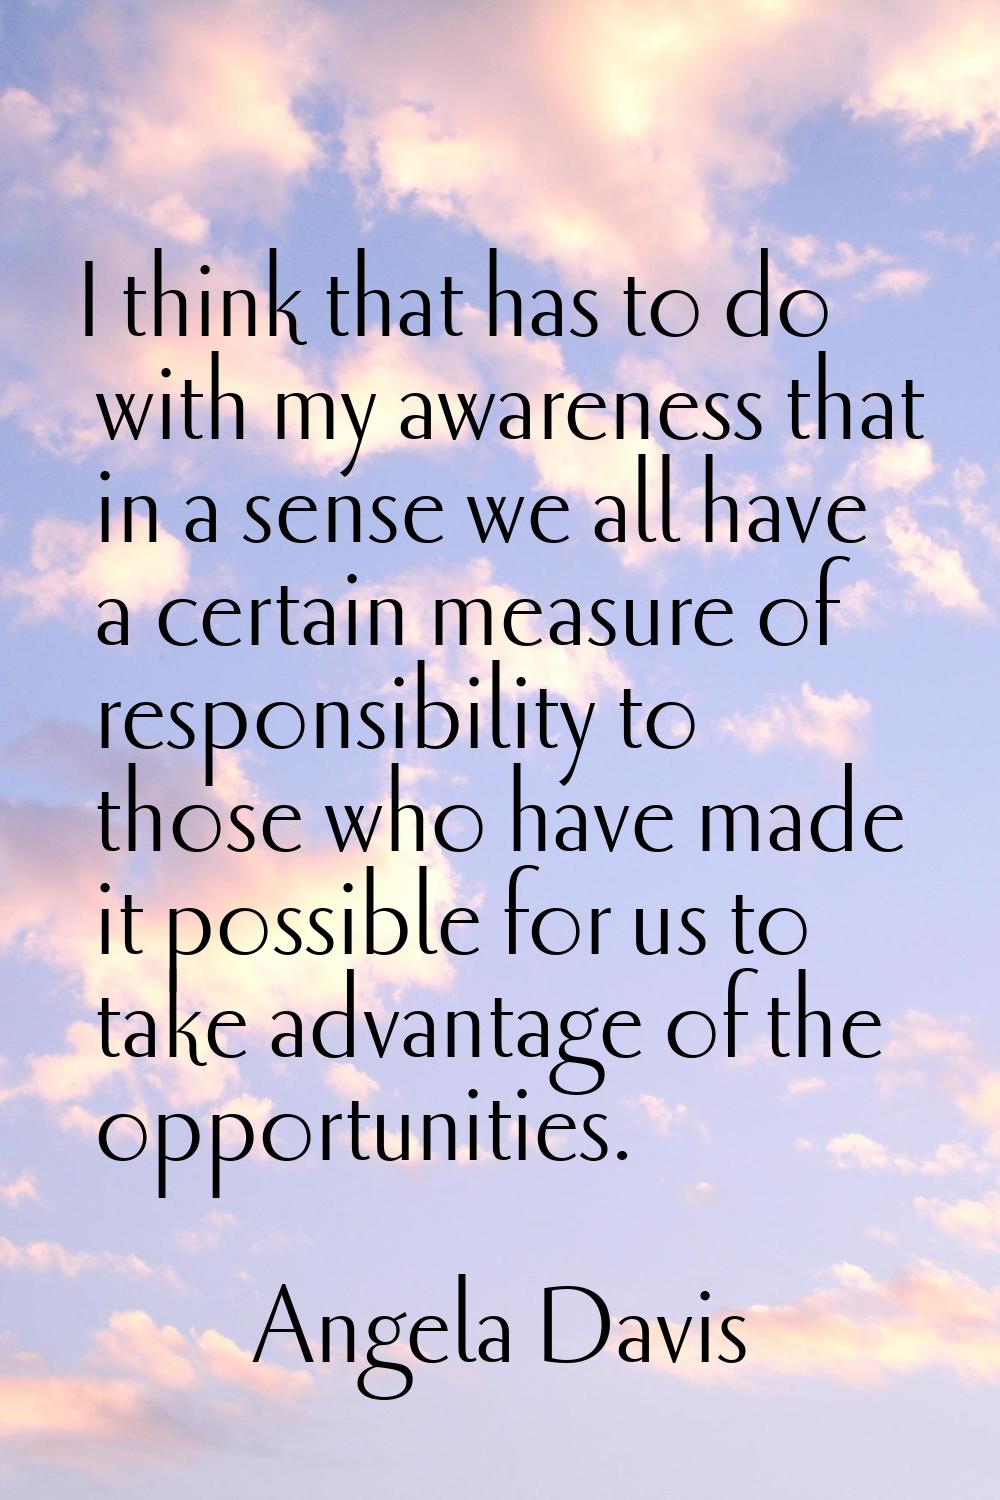 I think that has to do with my awareness that in a sense we all have a certain measure of responsib